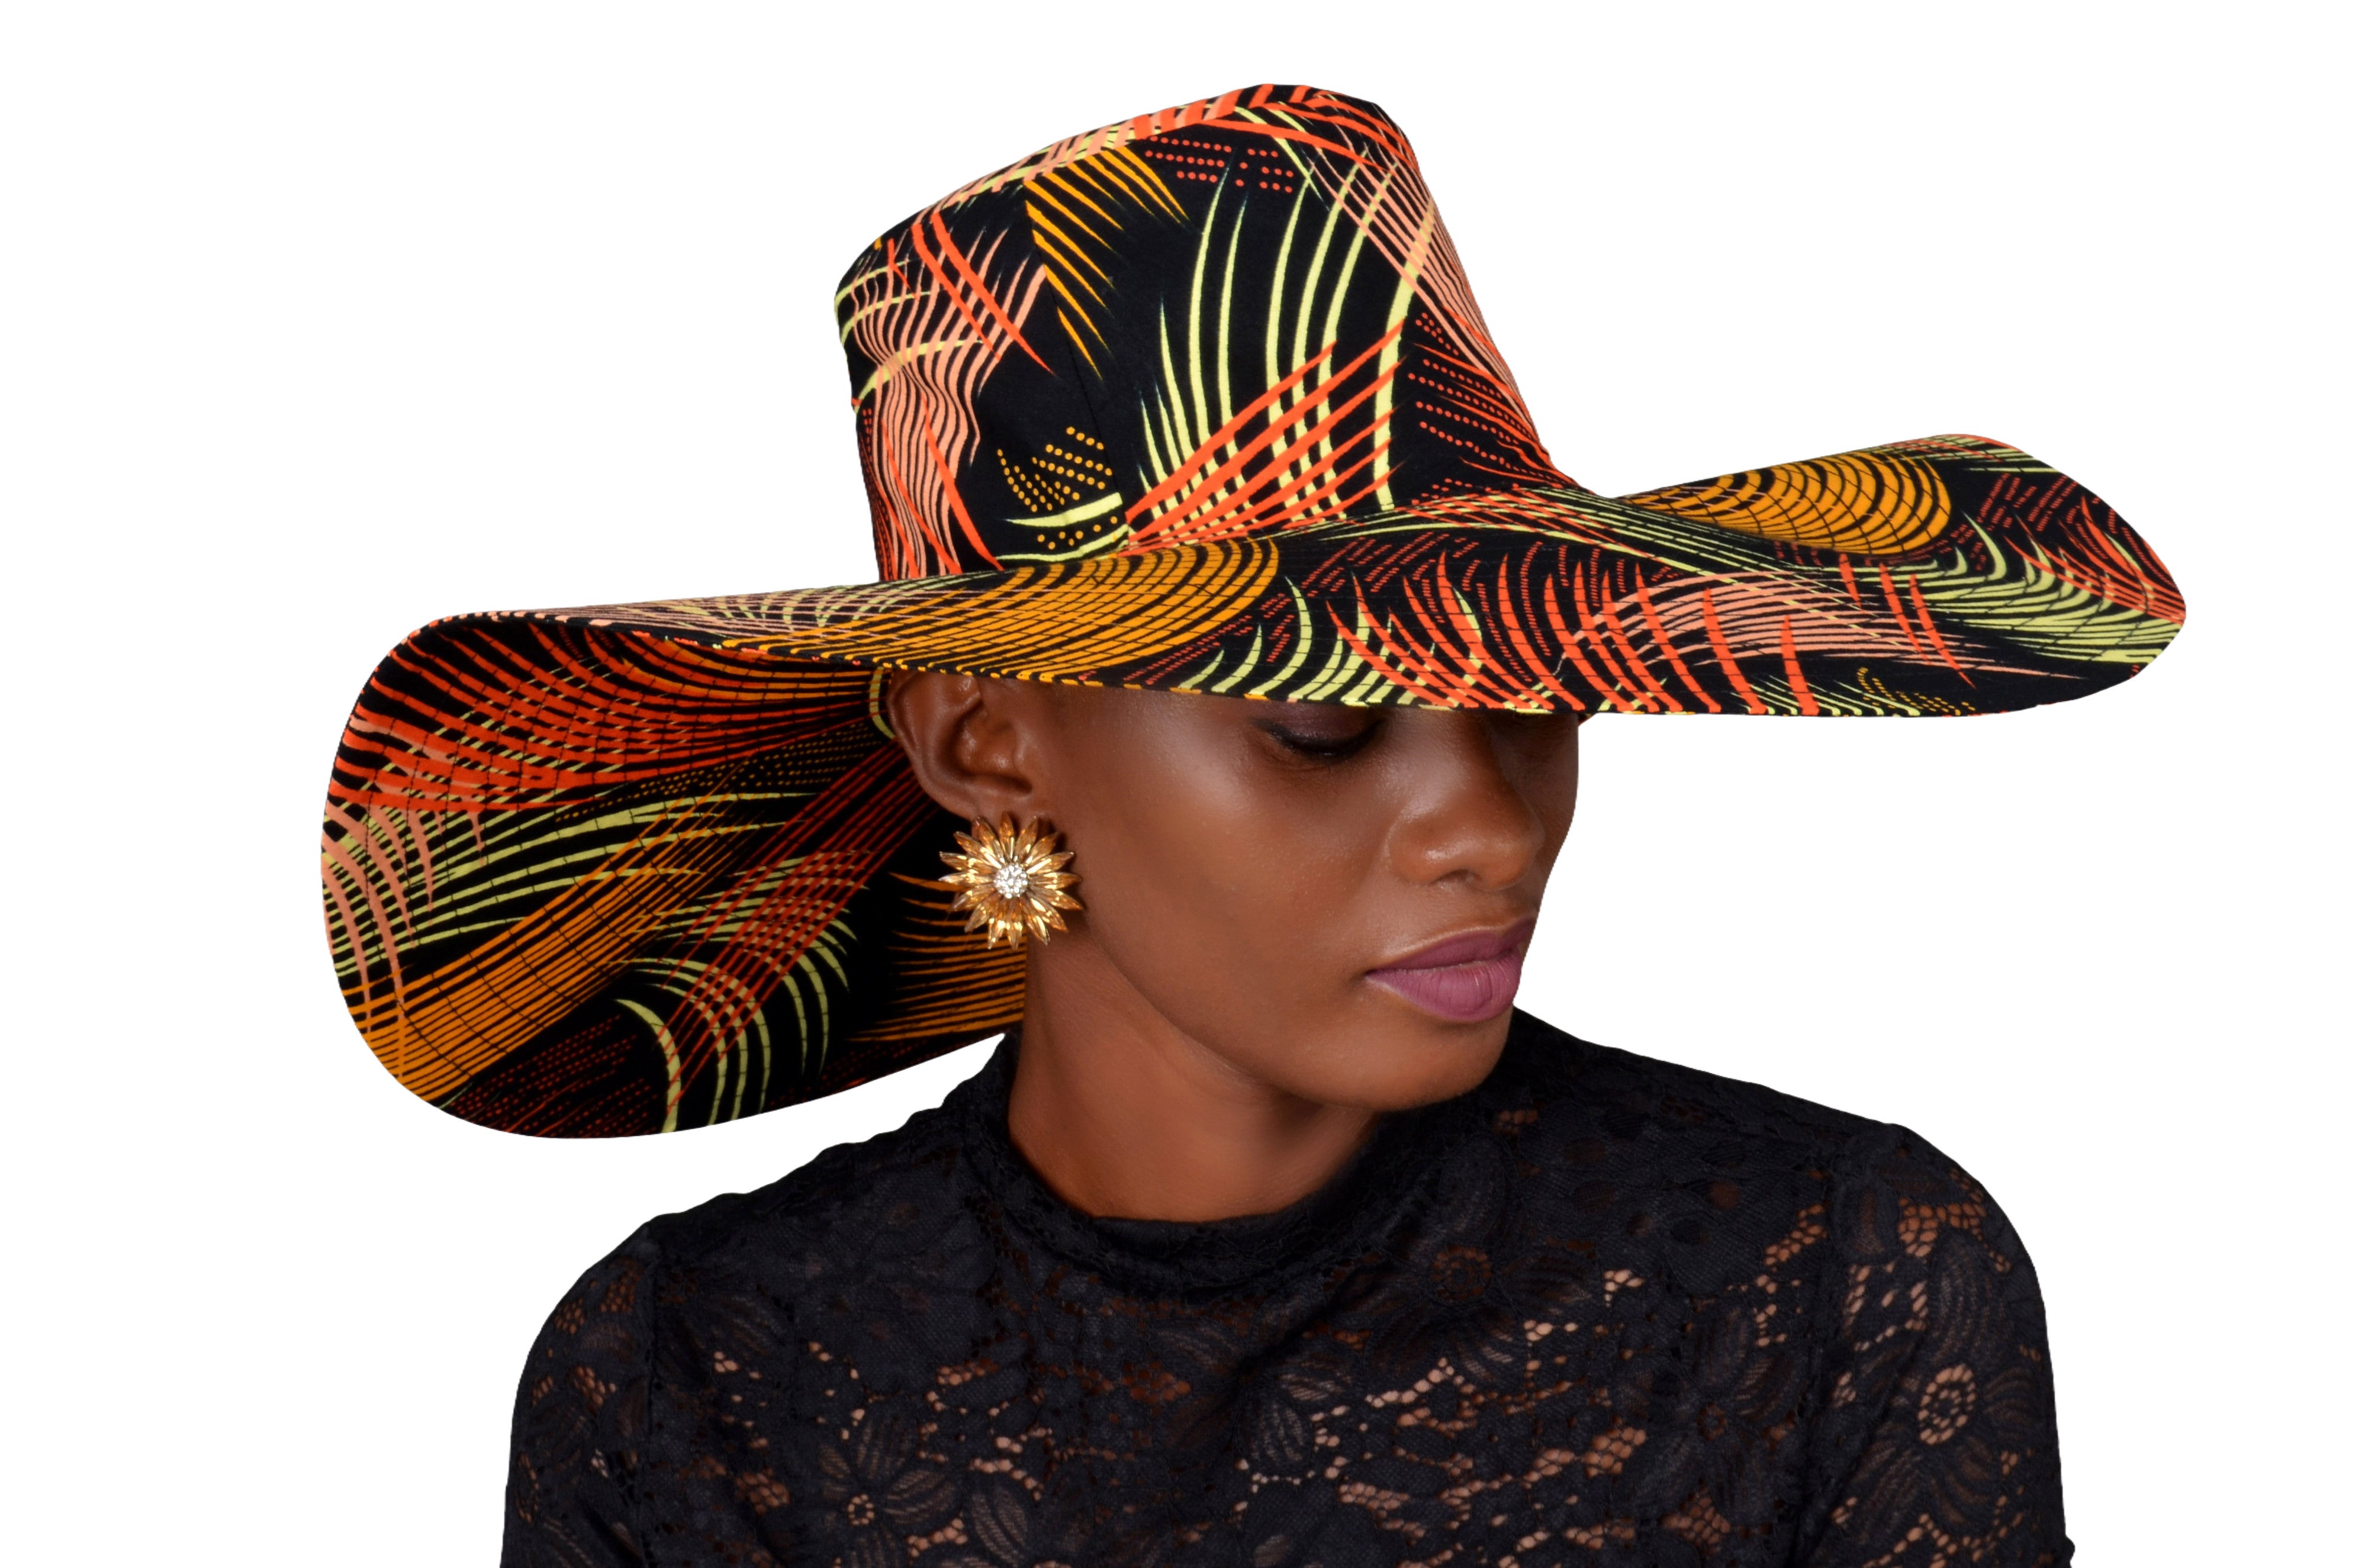 Jollo Nyasi Modern African Hat: let comfort and style give you the best shade.